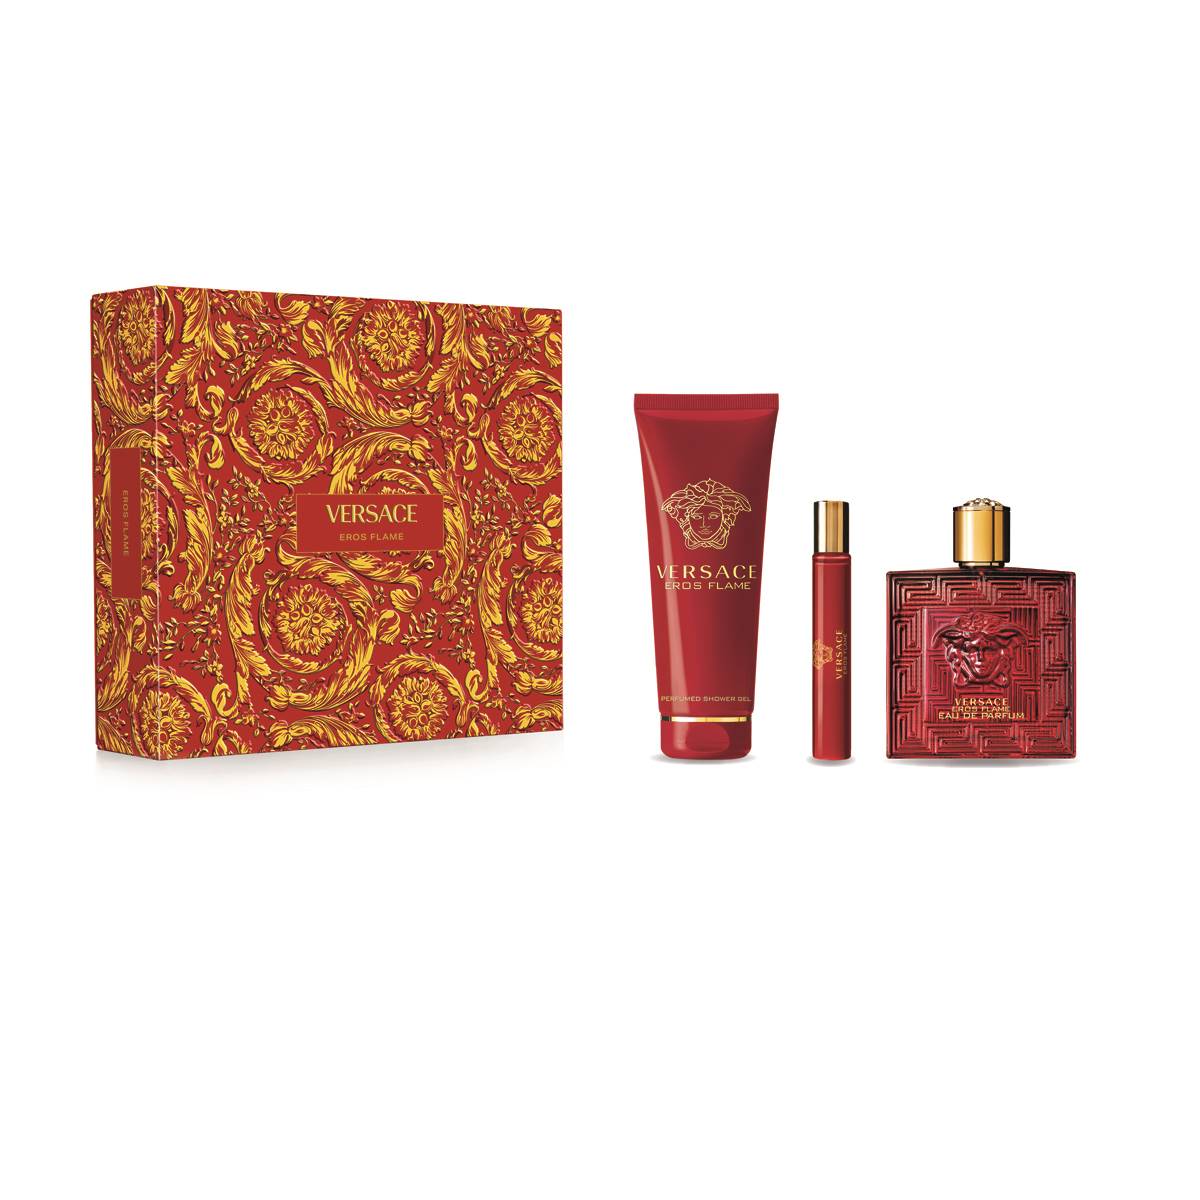 Versace Eros Flame 3pc. Gift Set  - $170 Value